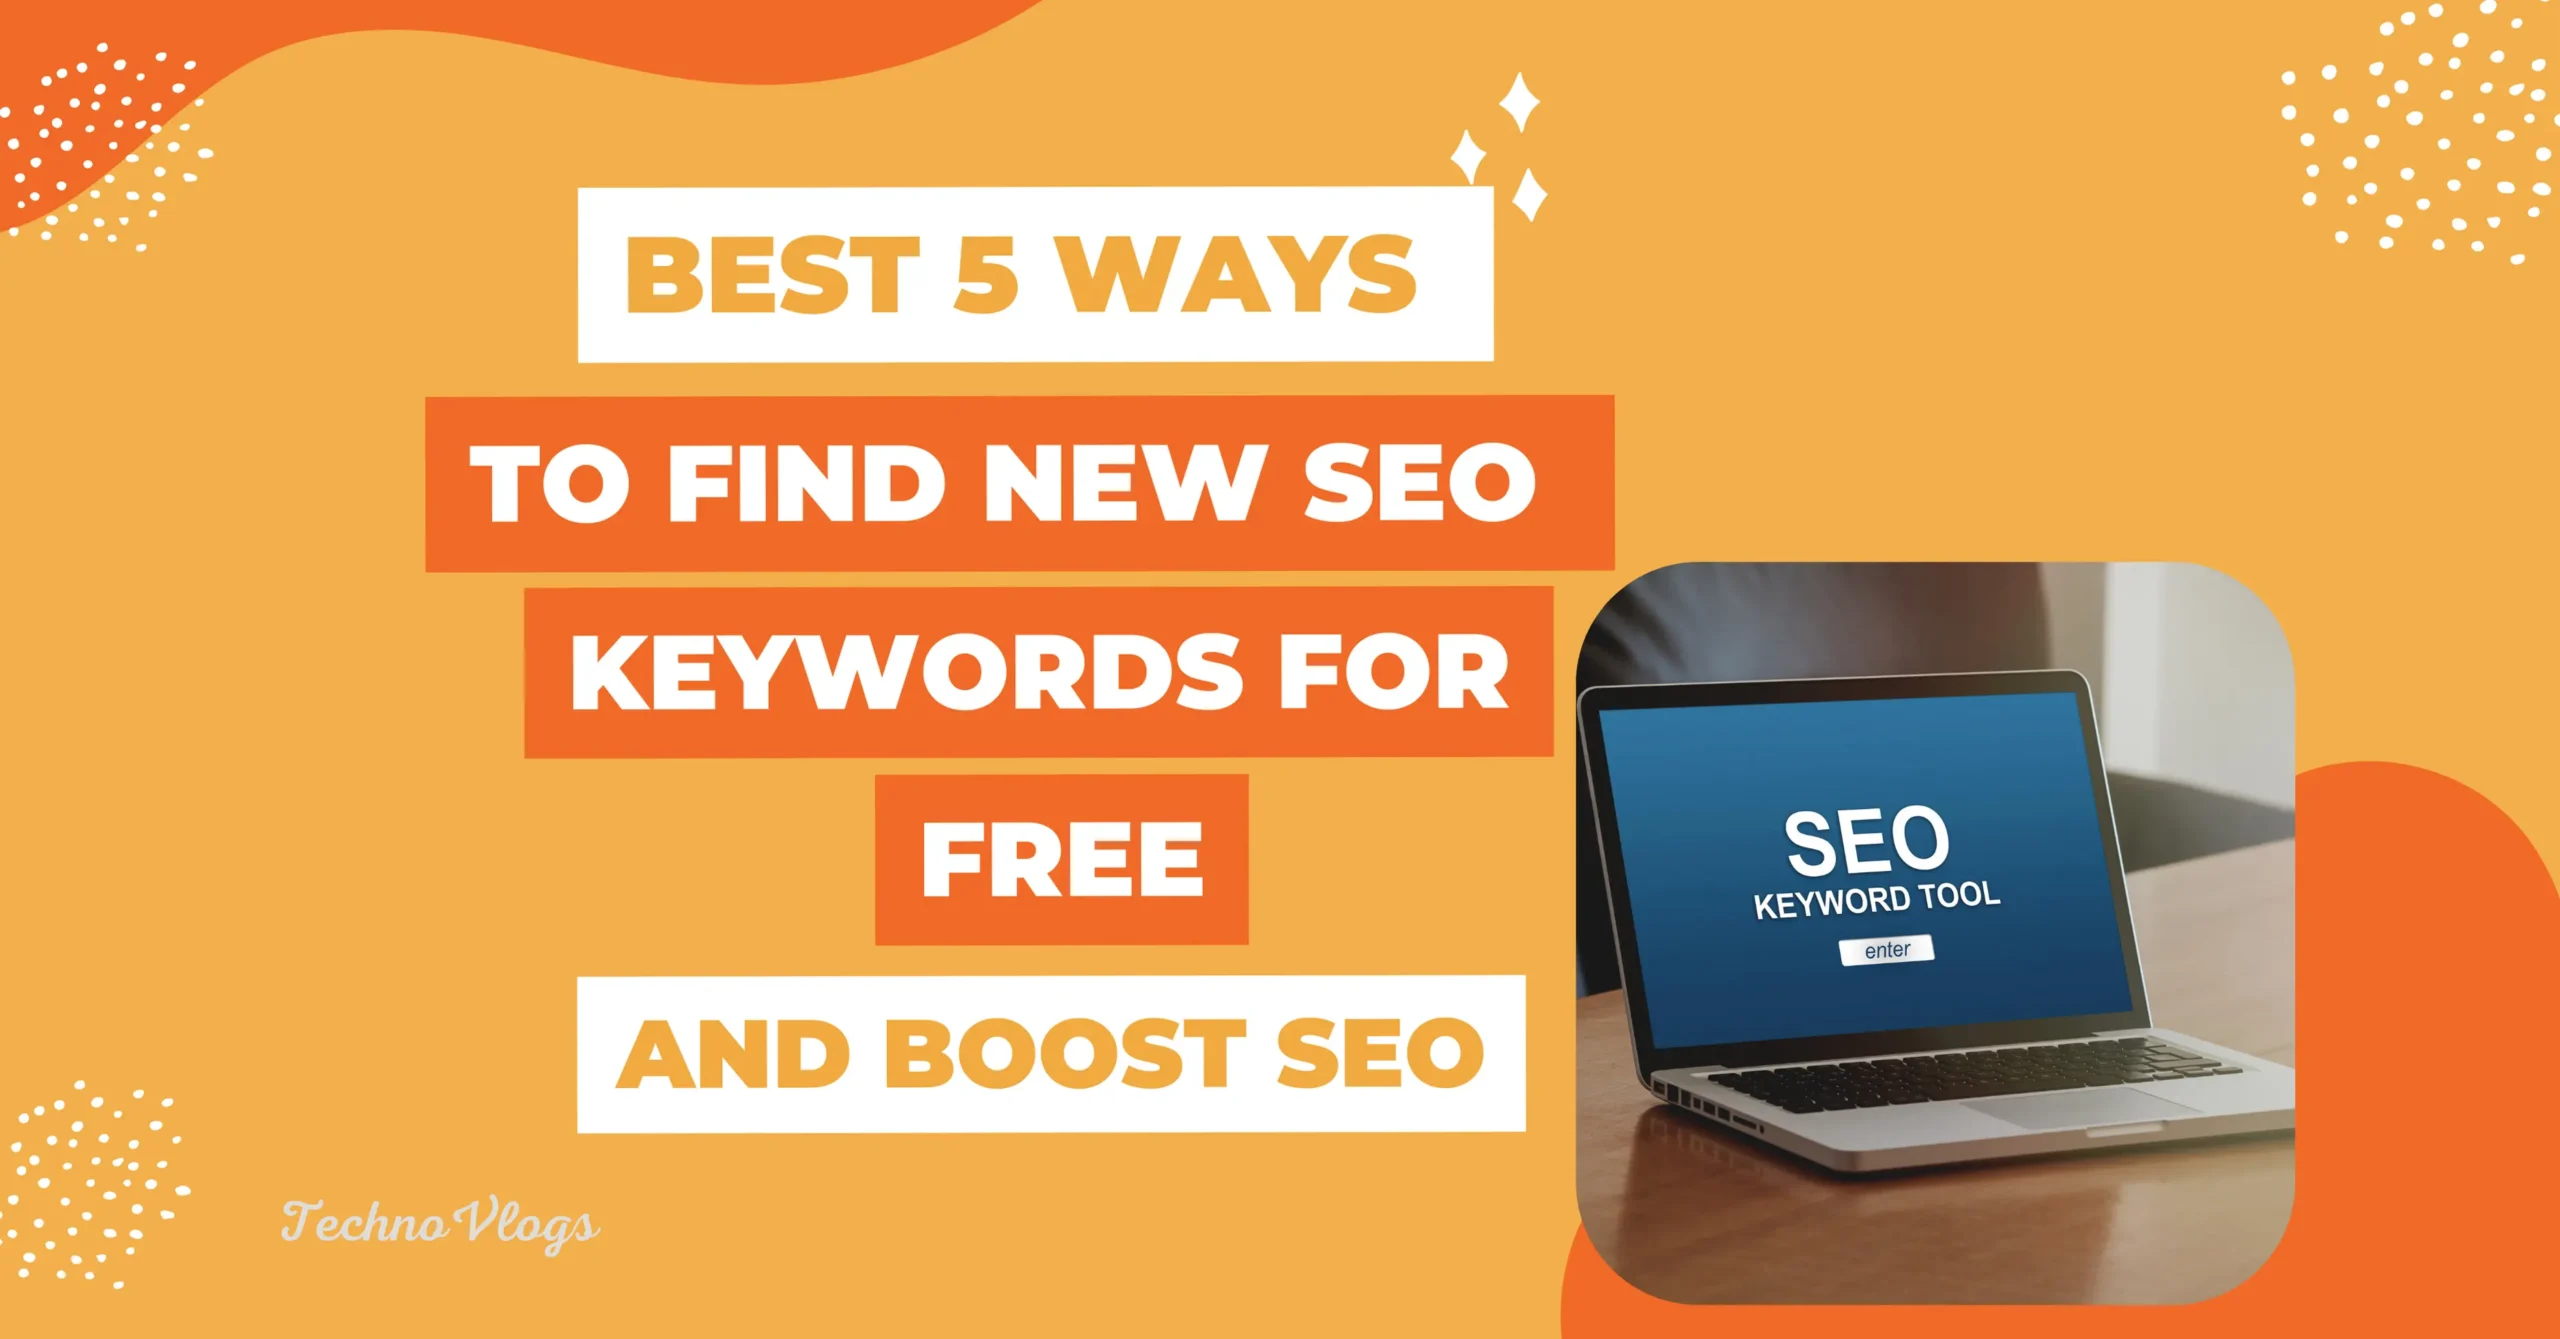 Best 5 Ways to find new SEO keywords for free and boost SEO